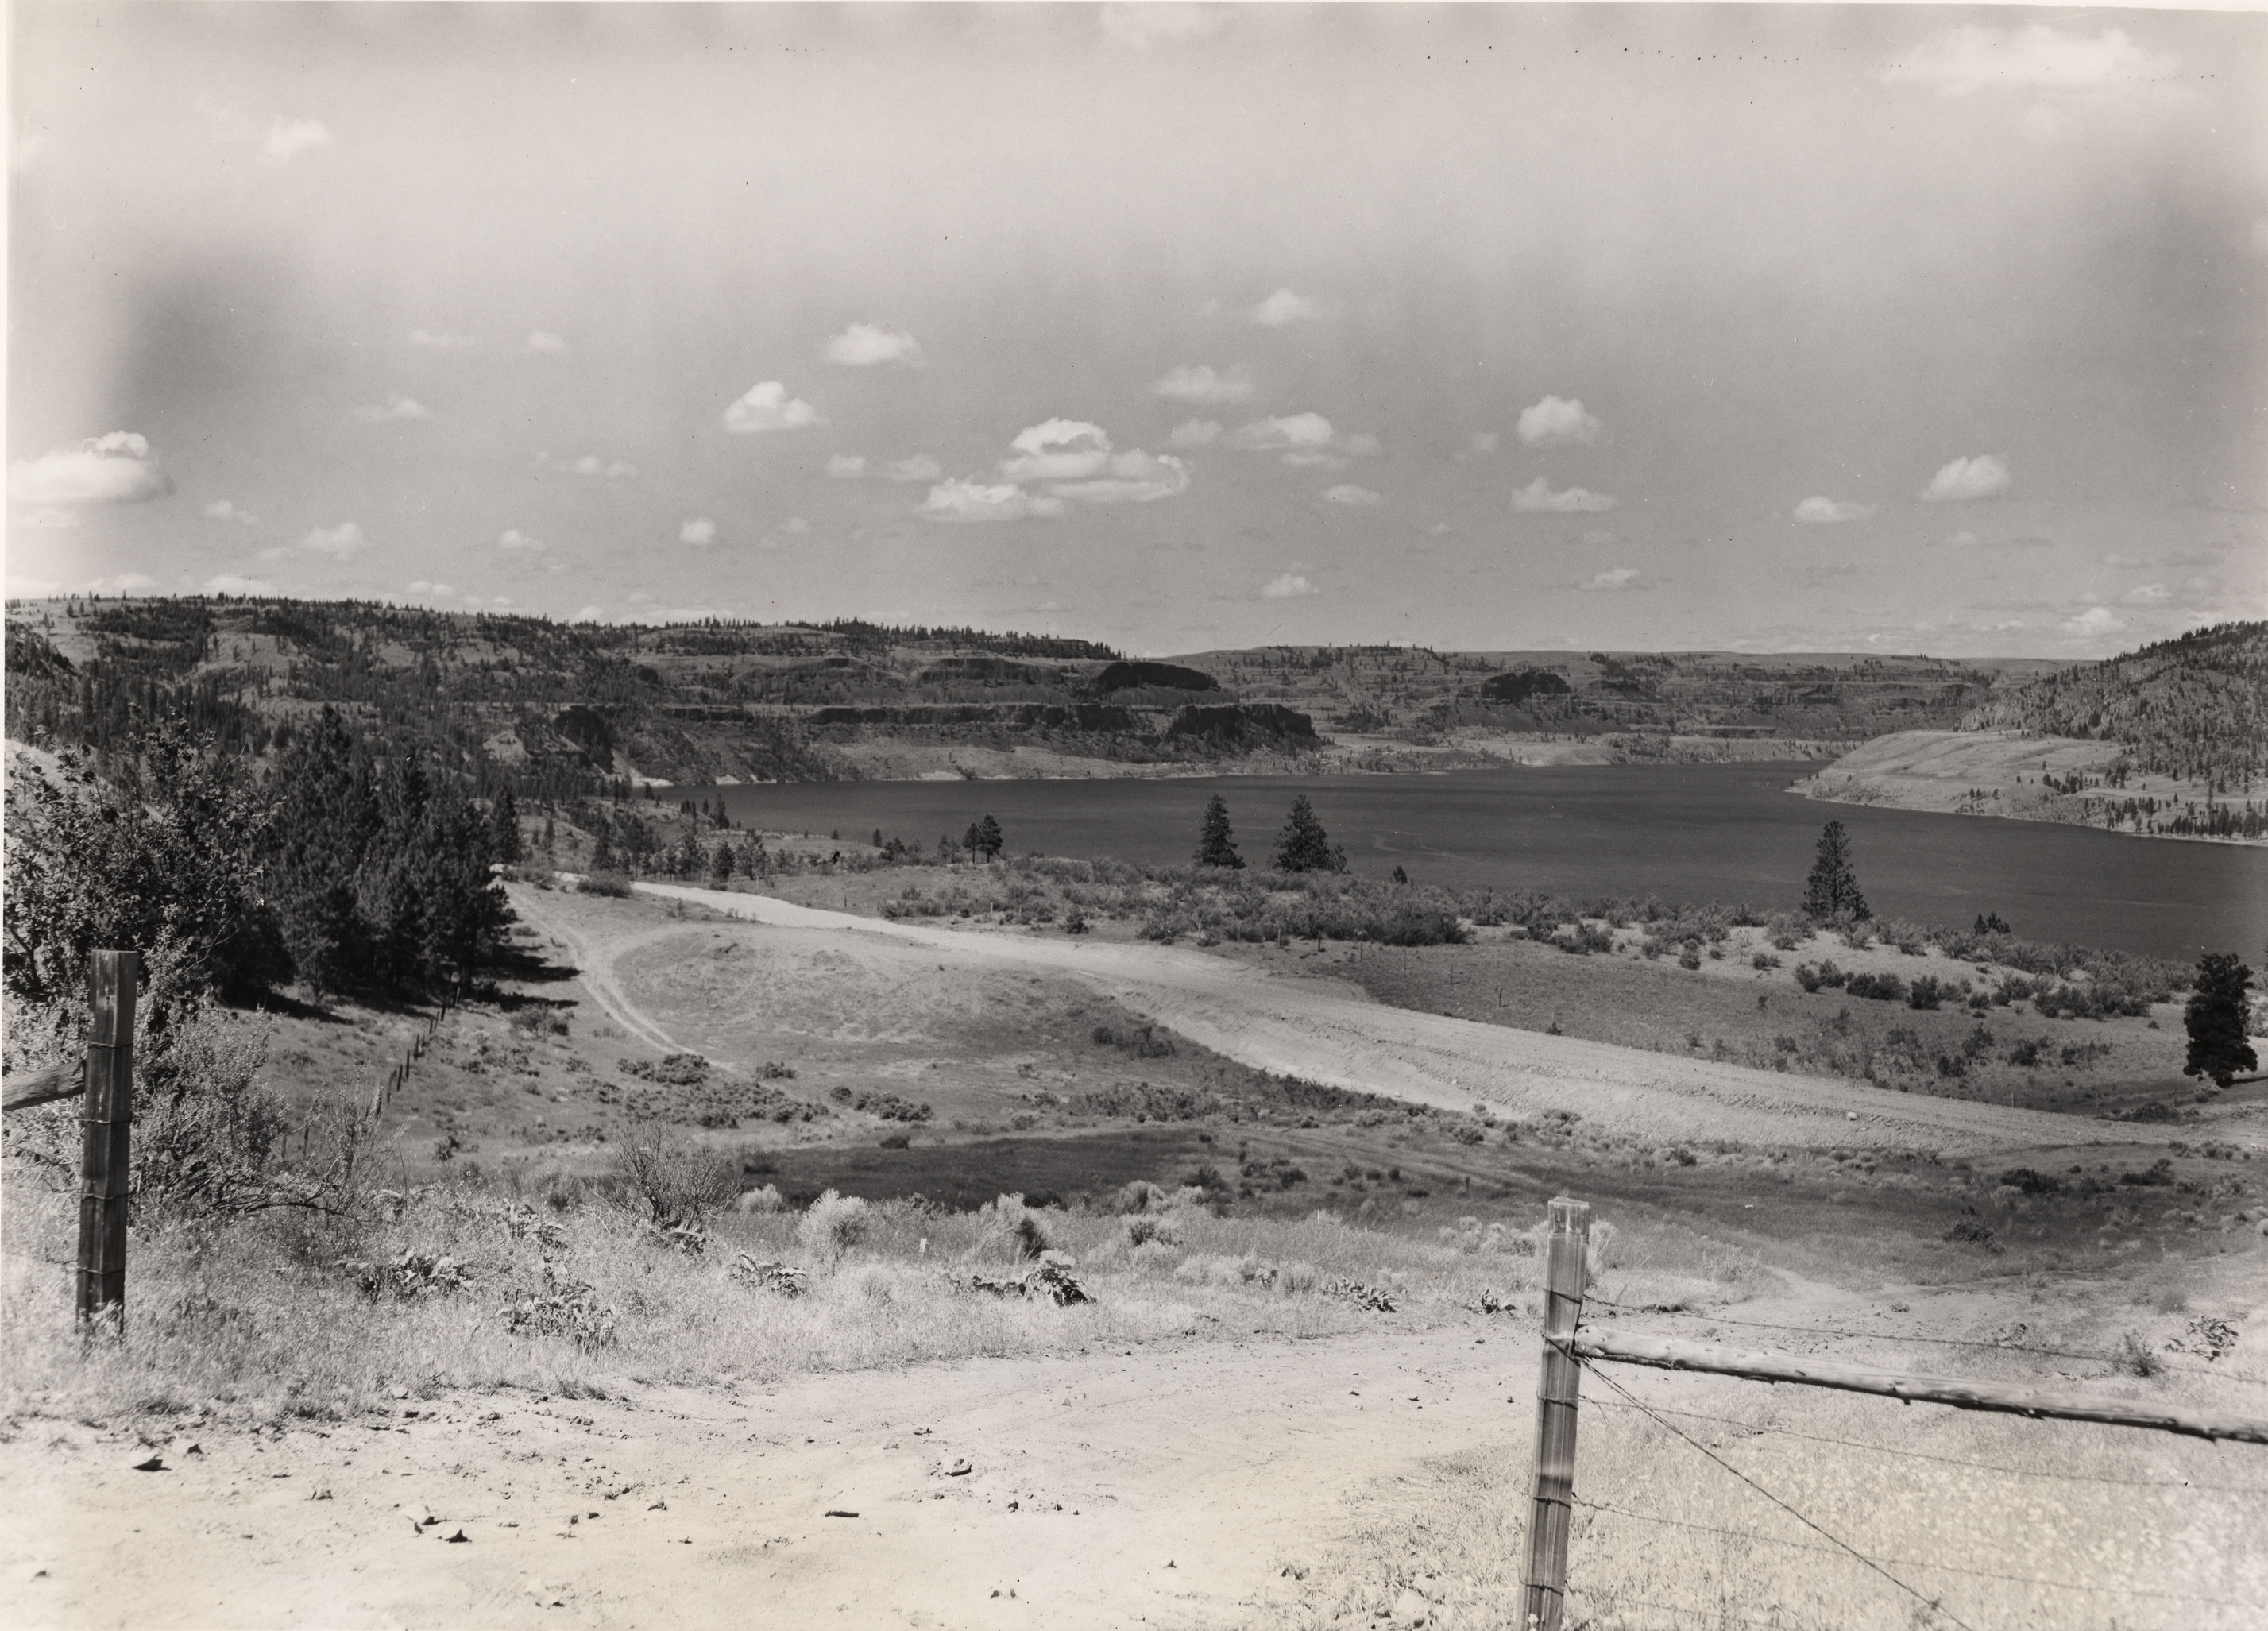 Black and white photograph of a road disappearing down a shrubby slope towards a large body of water